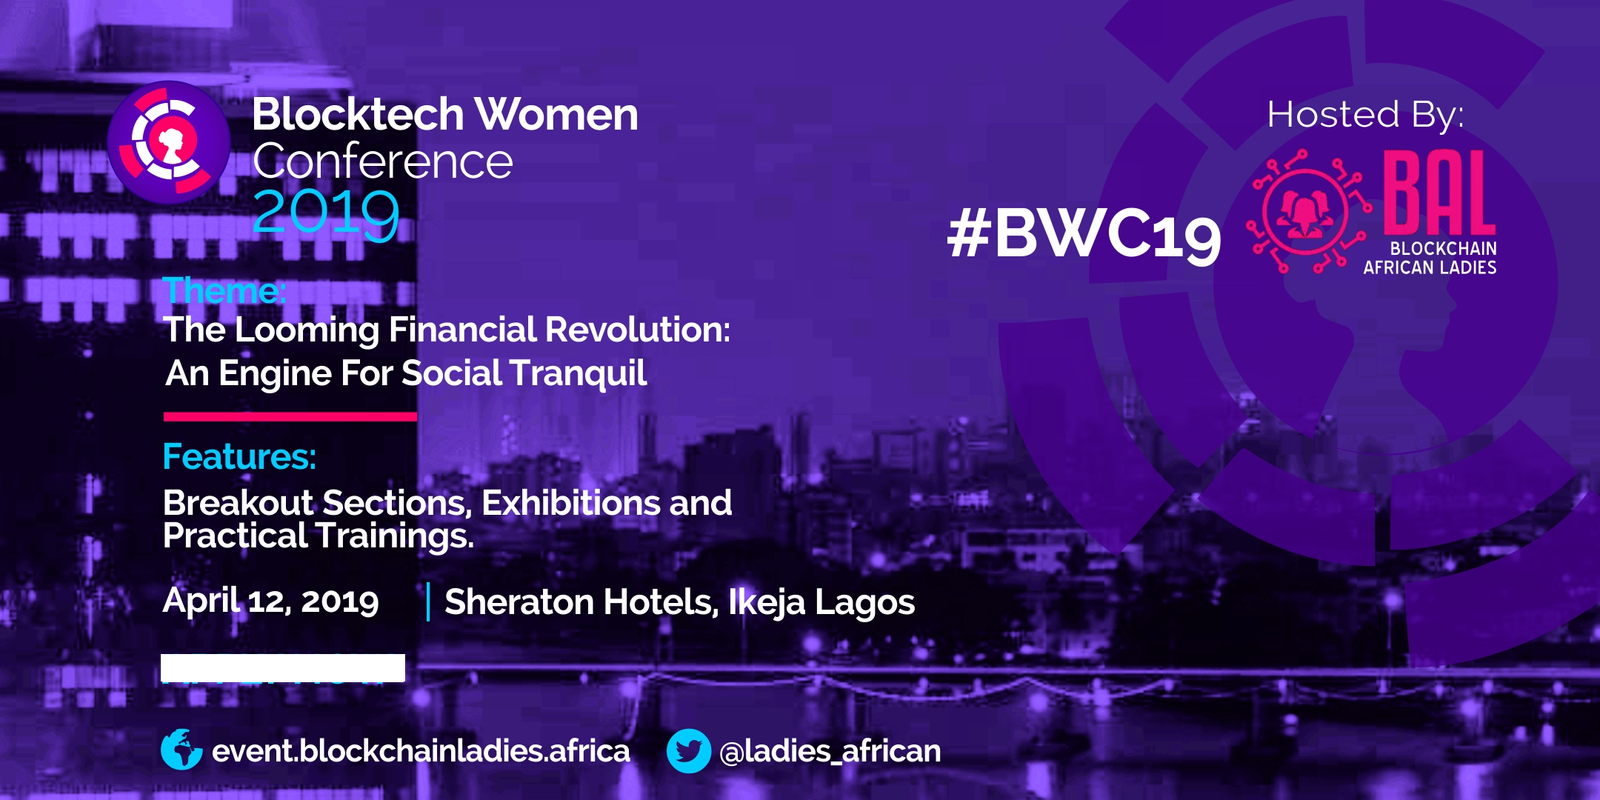 BAL ANNOUNCES HOST OF ITS PREMIER BLOCKTECH WOMEN CONFERENCE #BWC19 IN LAGOS NIGERIA